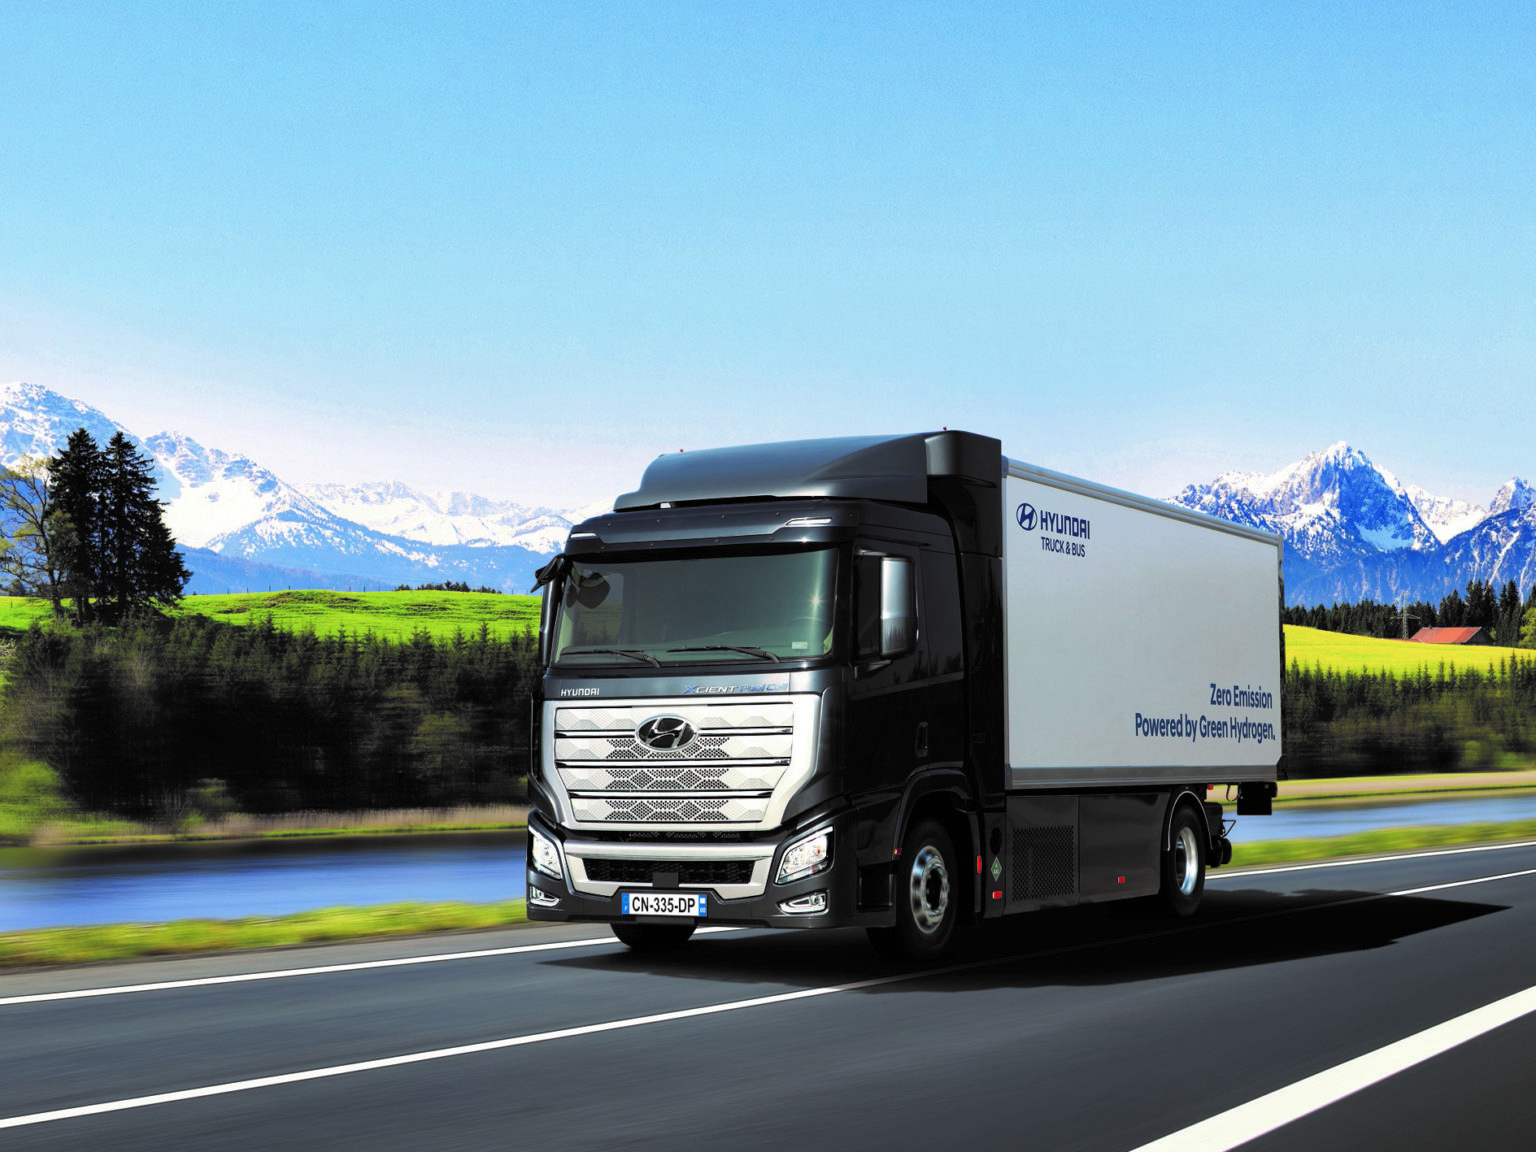 Hyundai Motor's Hydrogen Mobility Solution won the second-ever International Truck of the Year Truck Innovation Award in 2019.